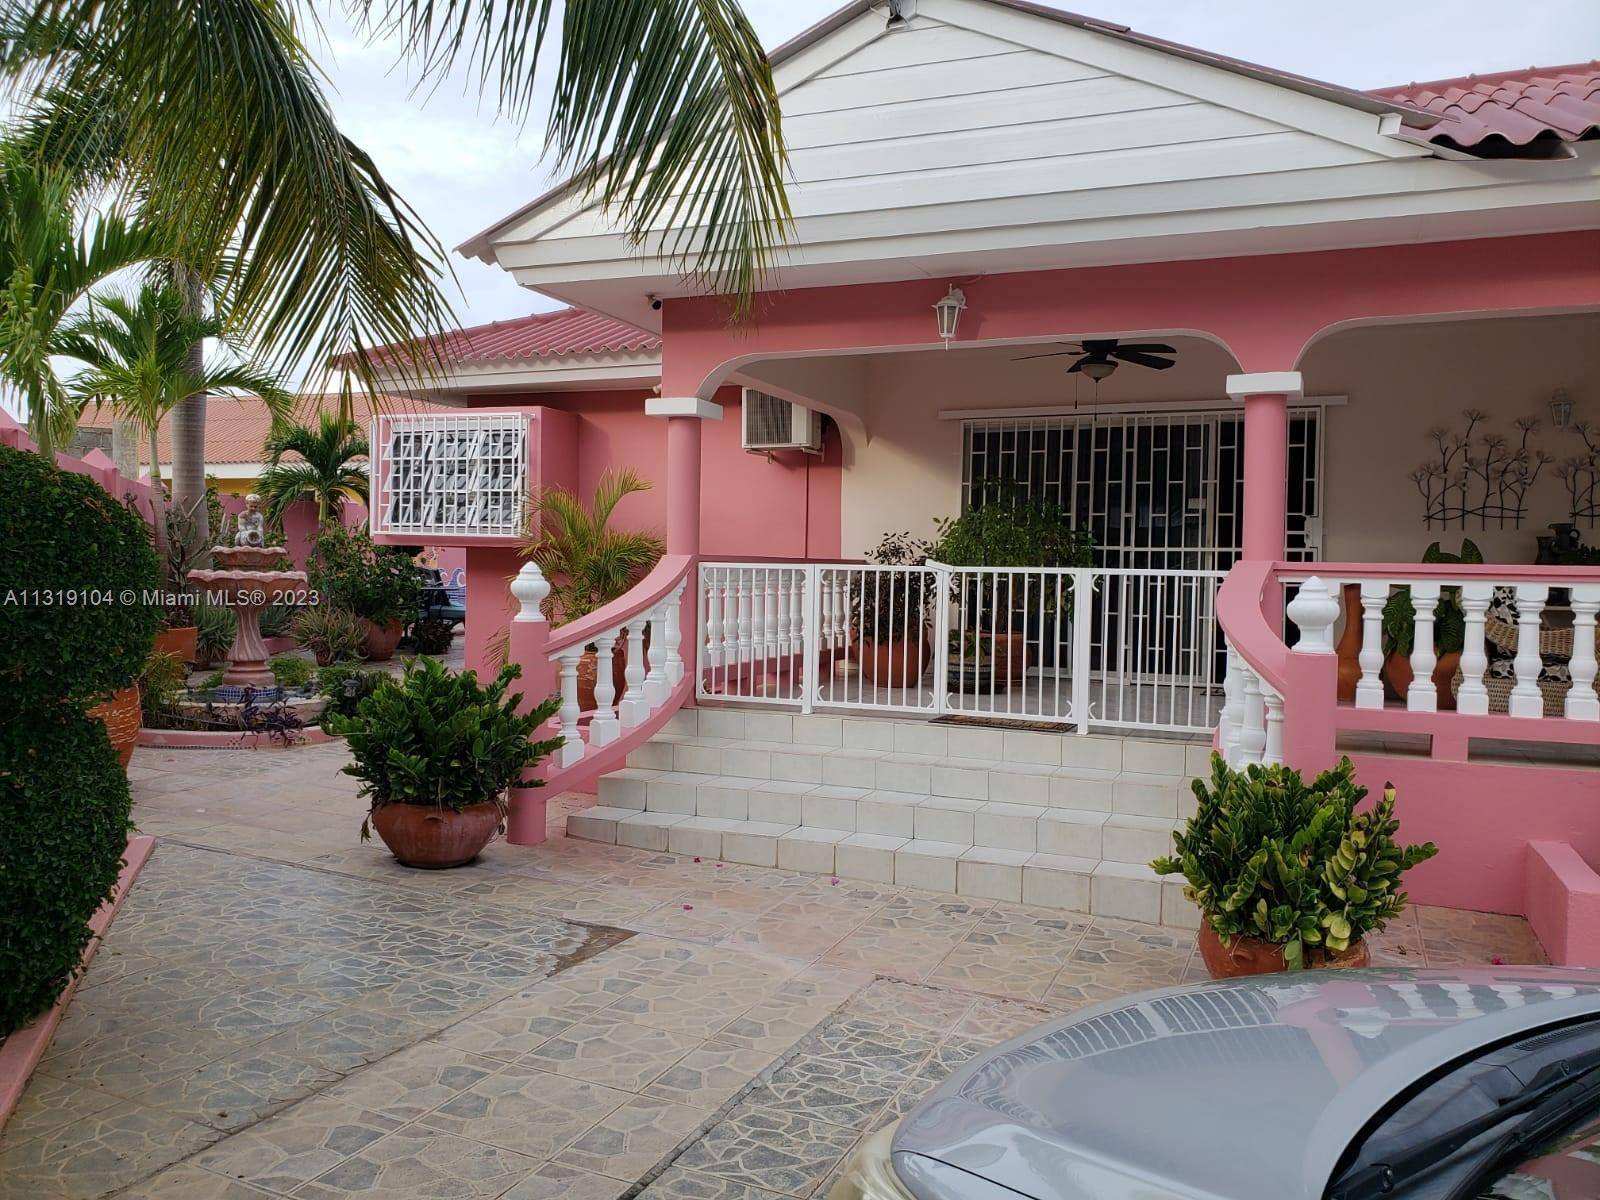 Spacious Single Family Home located in the Tropical Island of Curacao in the Southern Caribbean Sea, with neighboring islands Aruba and Bonaire.